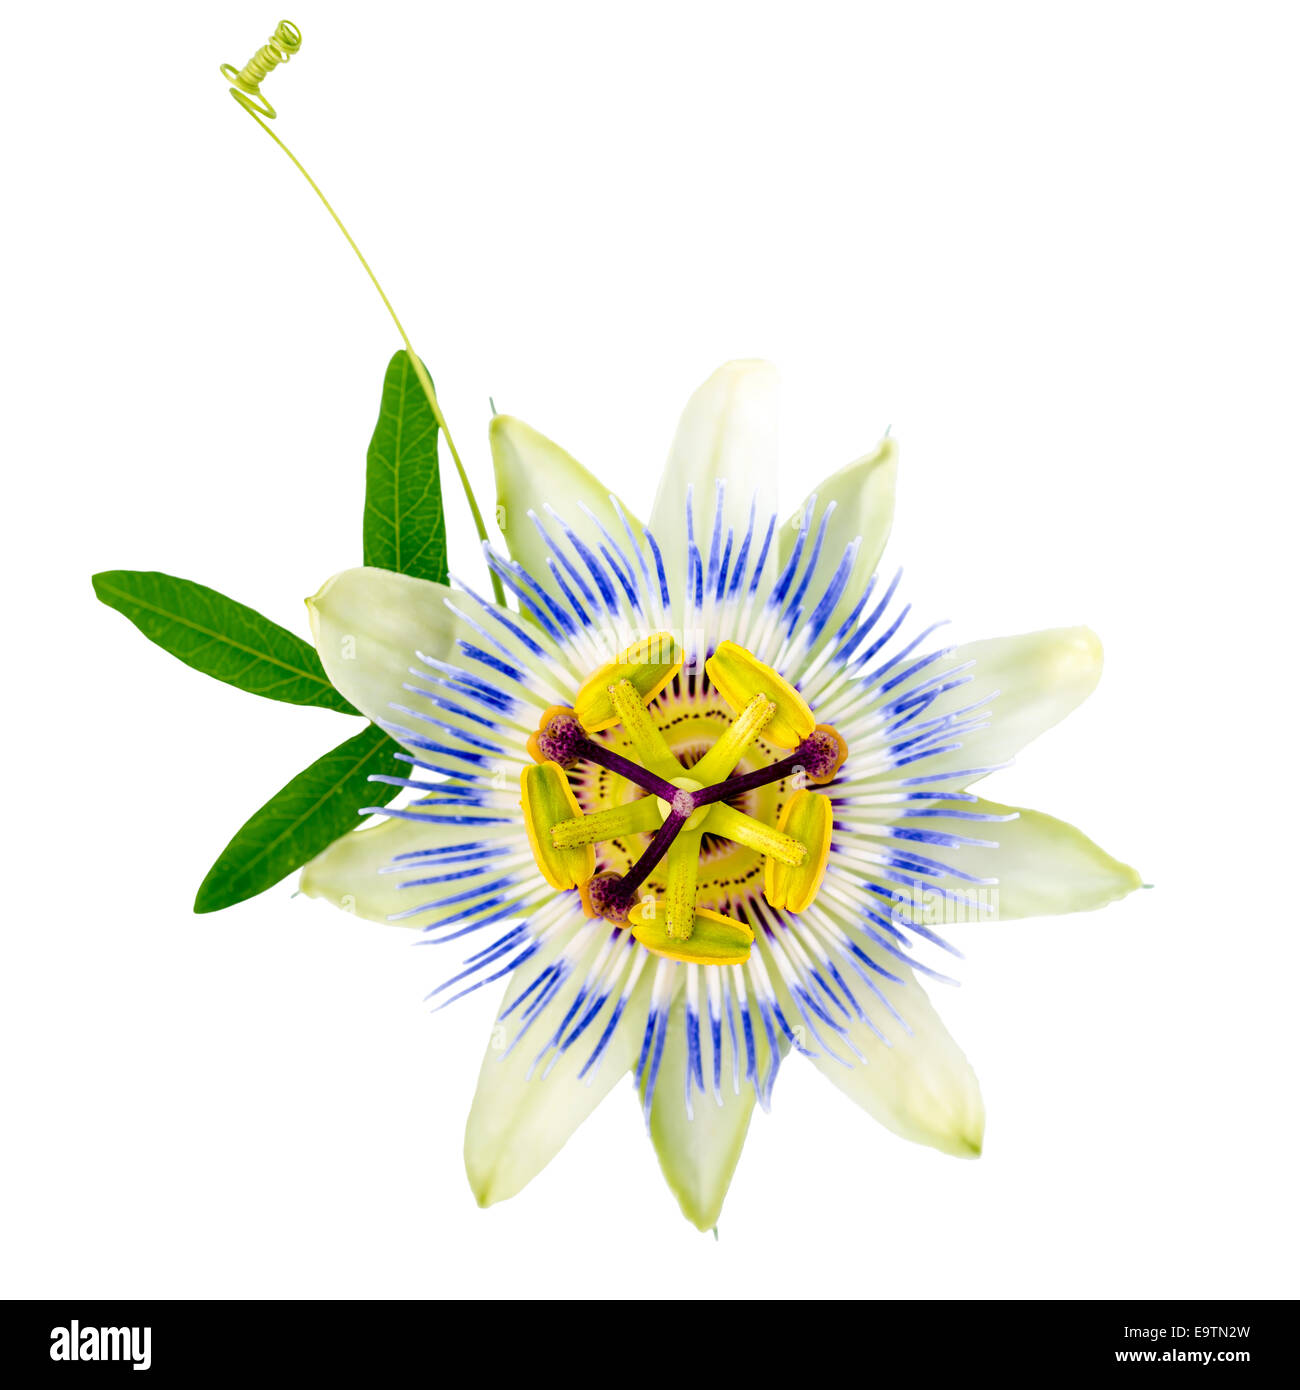 beautiful closeup of green passionflower branch and flower head is isolated on white background Stock Photo